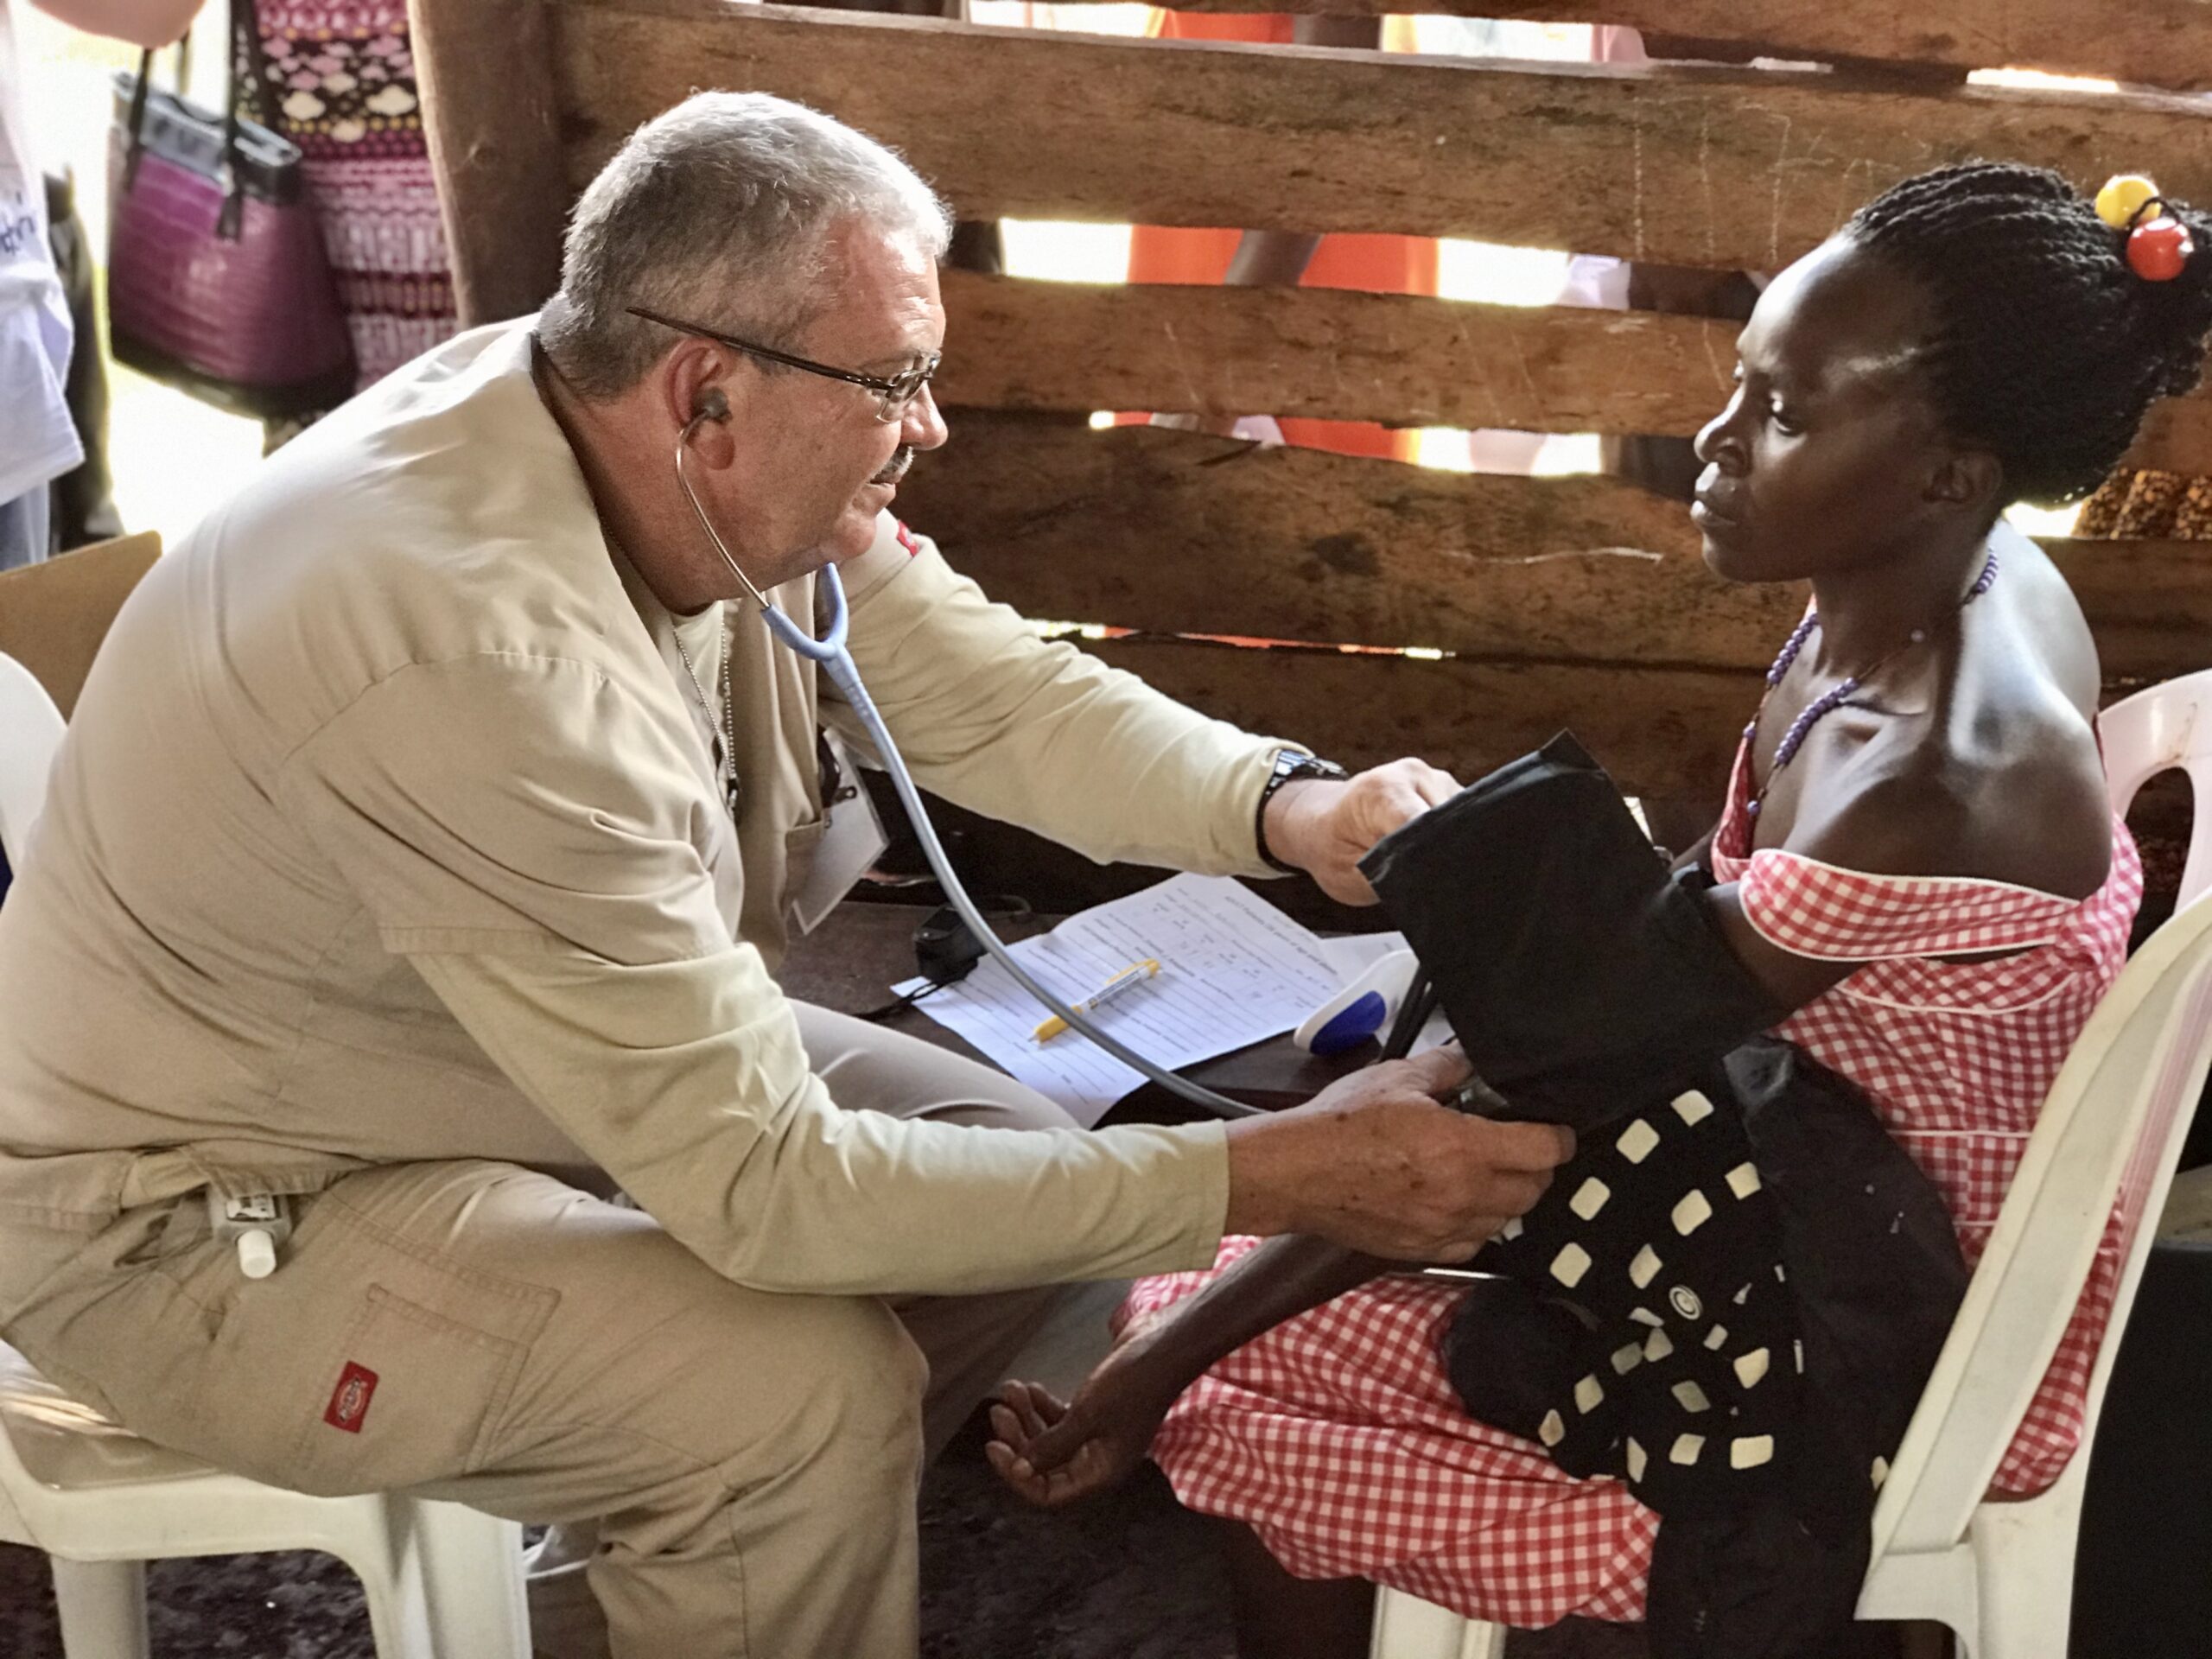 Ron Herman checks vital signs on a patient during the Mercy Medical Team trip to Uganda. Used with permission.